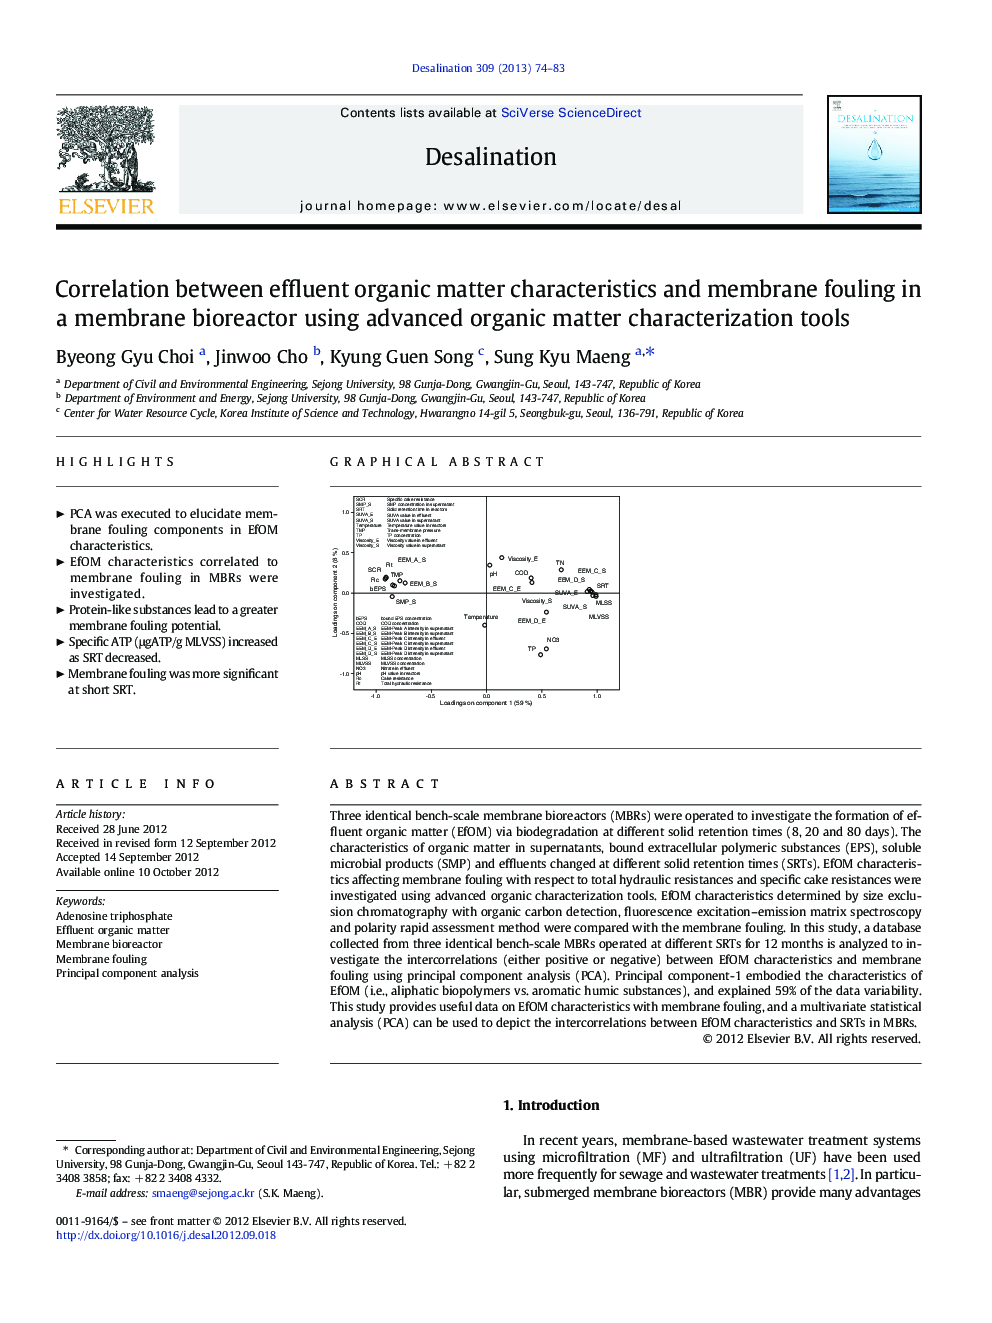 Correlation between effluent organic matter characteristics and membrane fouling in a membrane bioreactor using advanced organic matter characterization tools